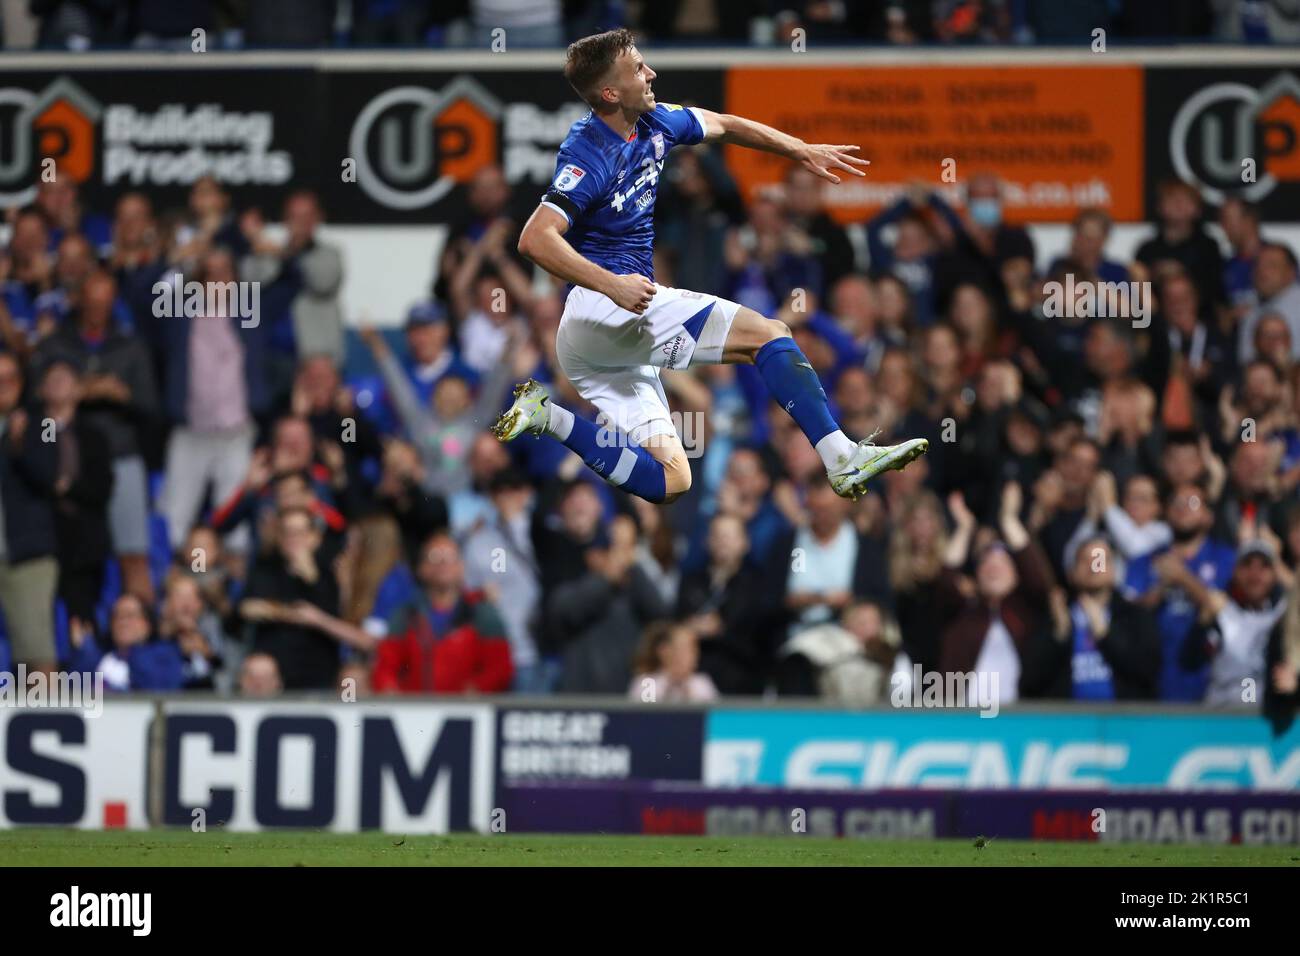 Lee Evans of Ipswich Town celebrates after scoring a goal to make it 2-0 - Ipswich Town v Bristol Rovers, Sky Bet League One, Portman Road, Ipswich, UK - 13th September 2022  Editorial Use Only - DataCo restrictions apply Stock Photo